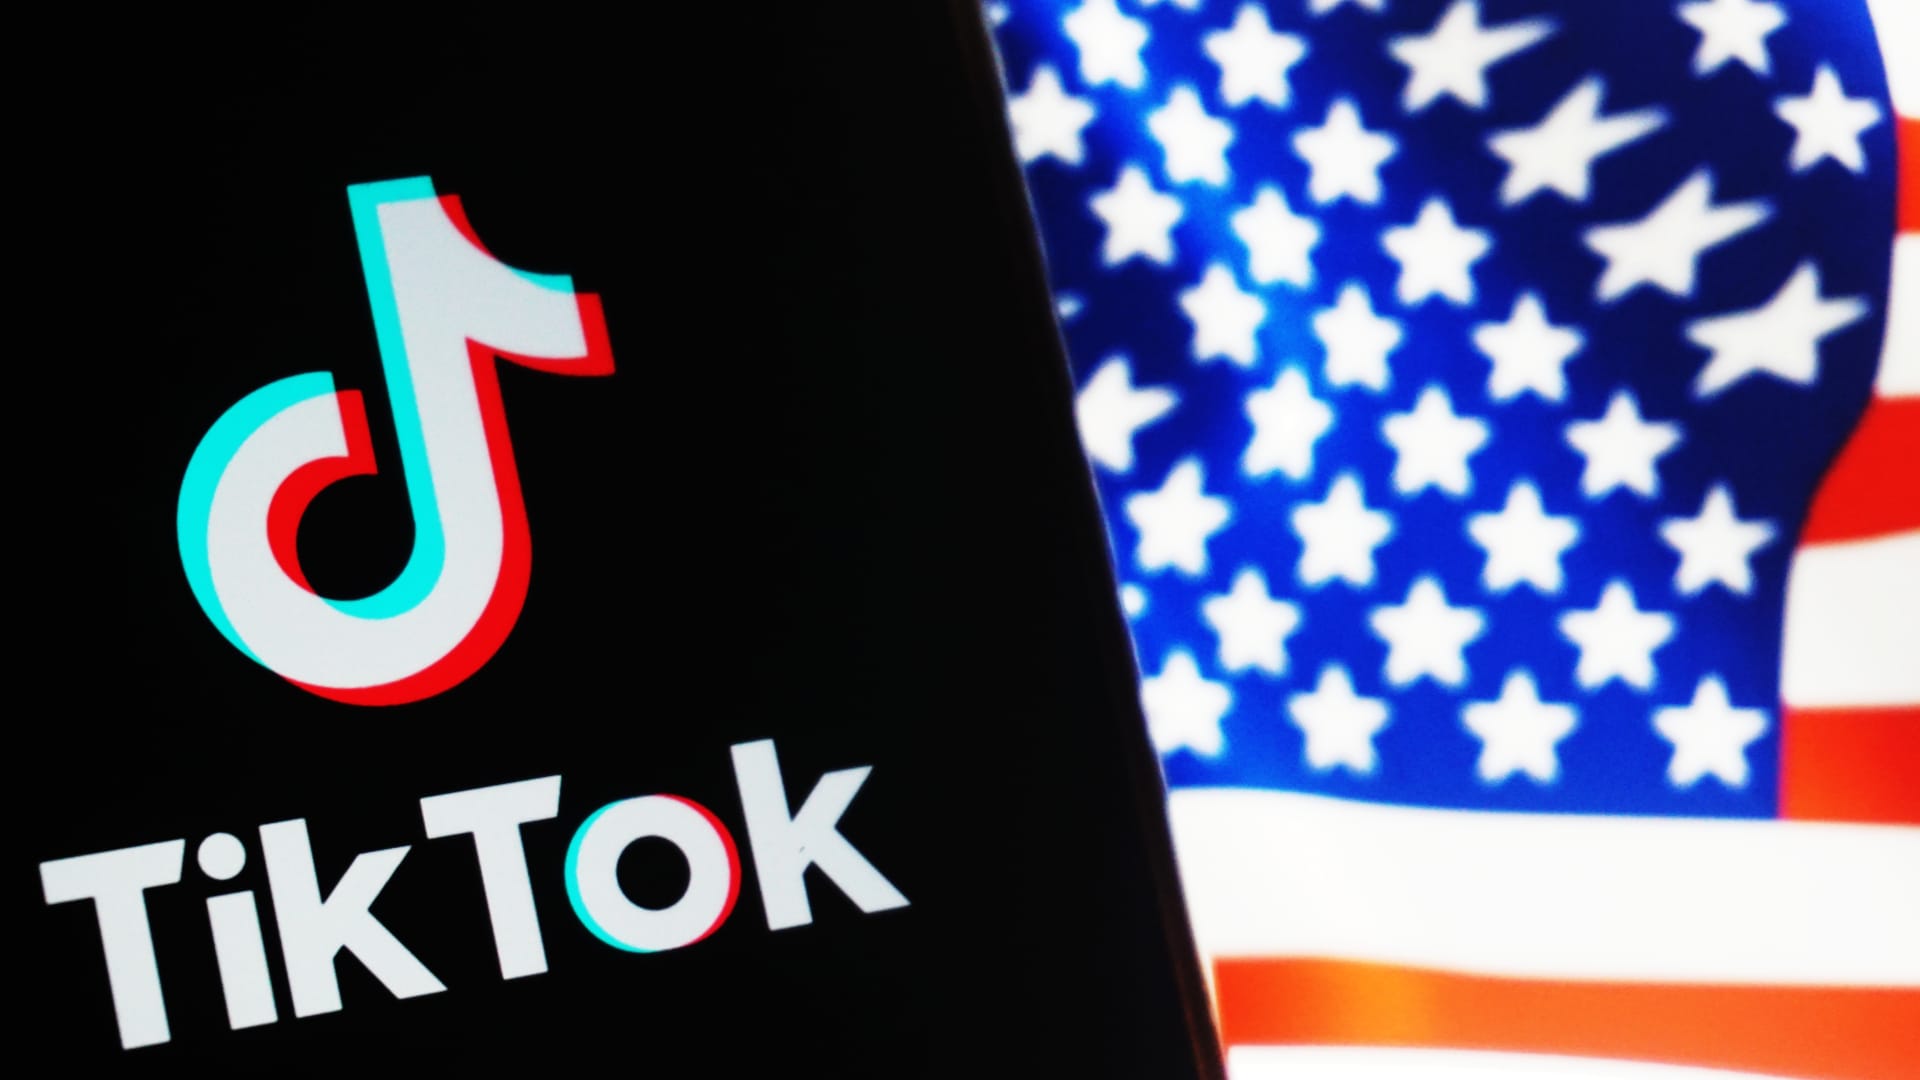 TikTok confirms the U.S. has threatened ban if Chinese parent ByteDance doesn't sell stake